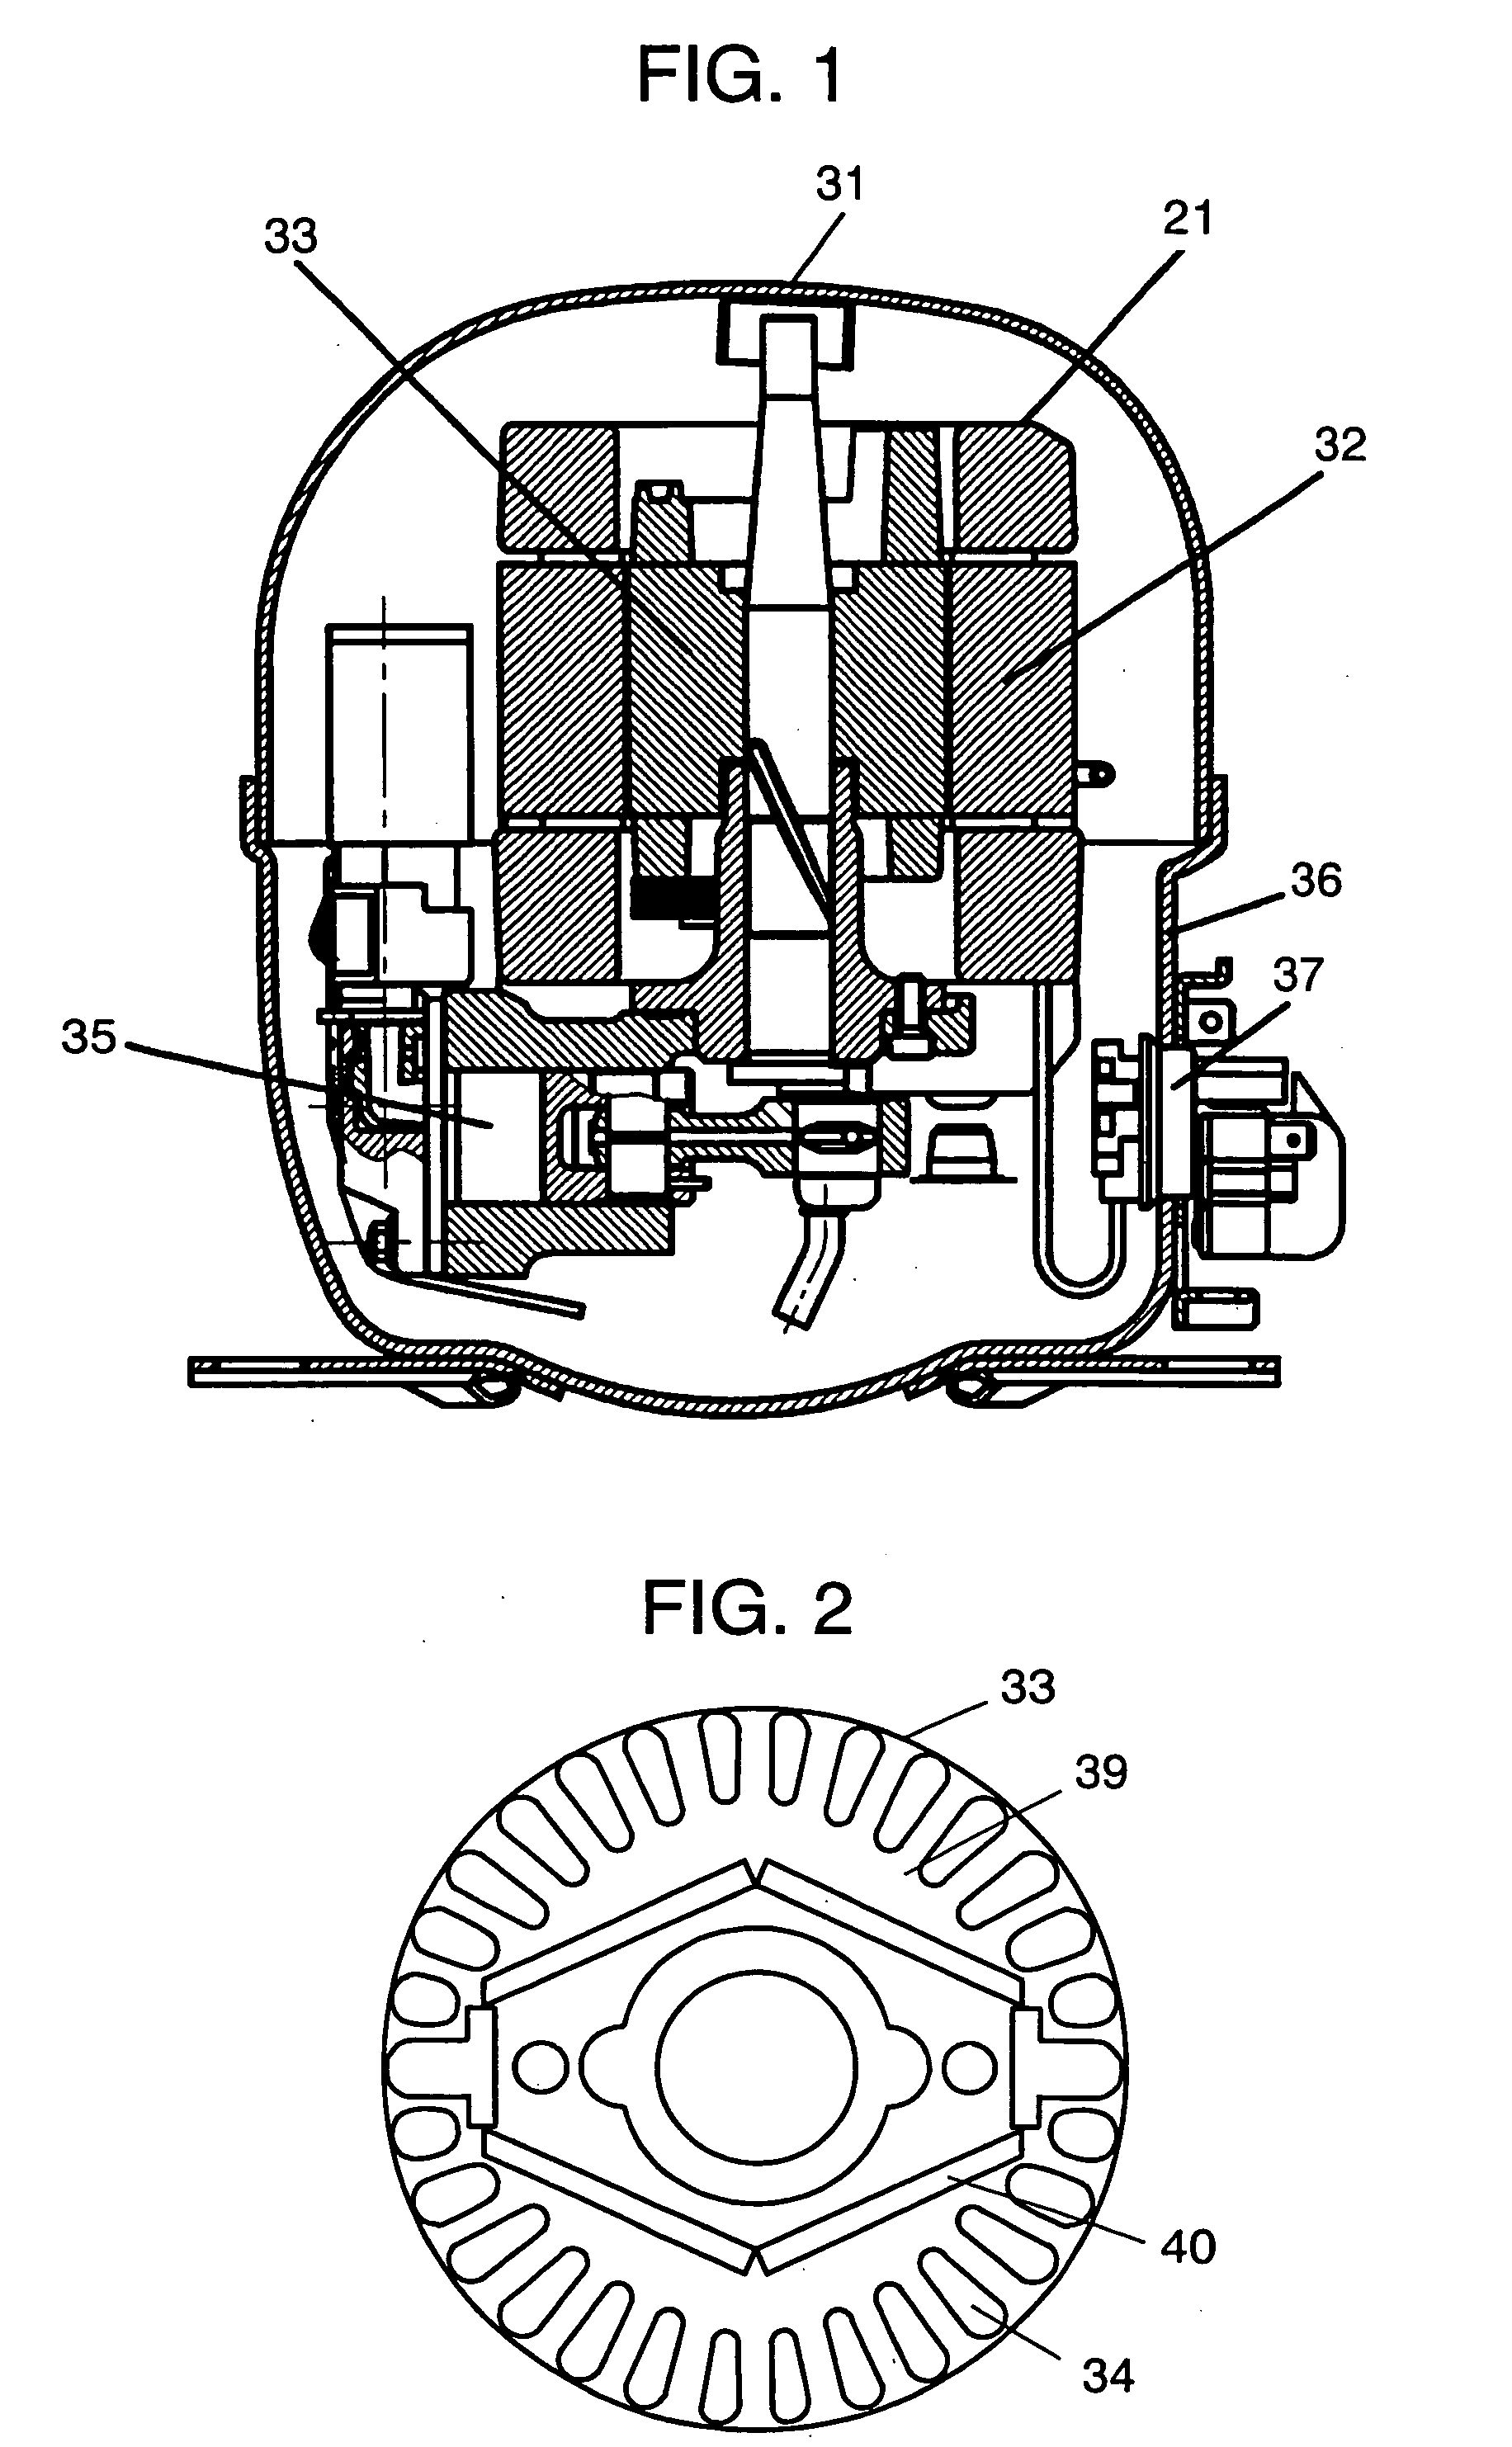 Synchronous induction motor and electric hermetic compressor using the same